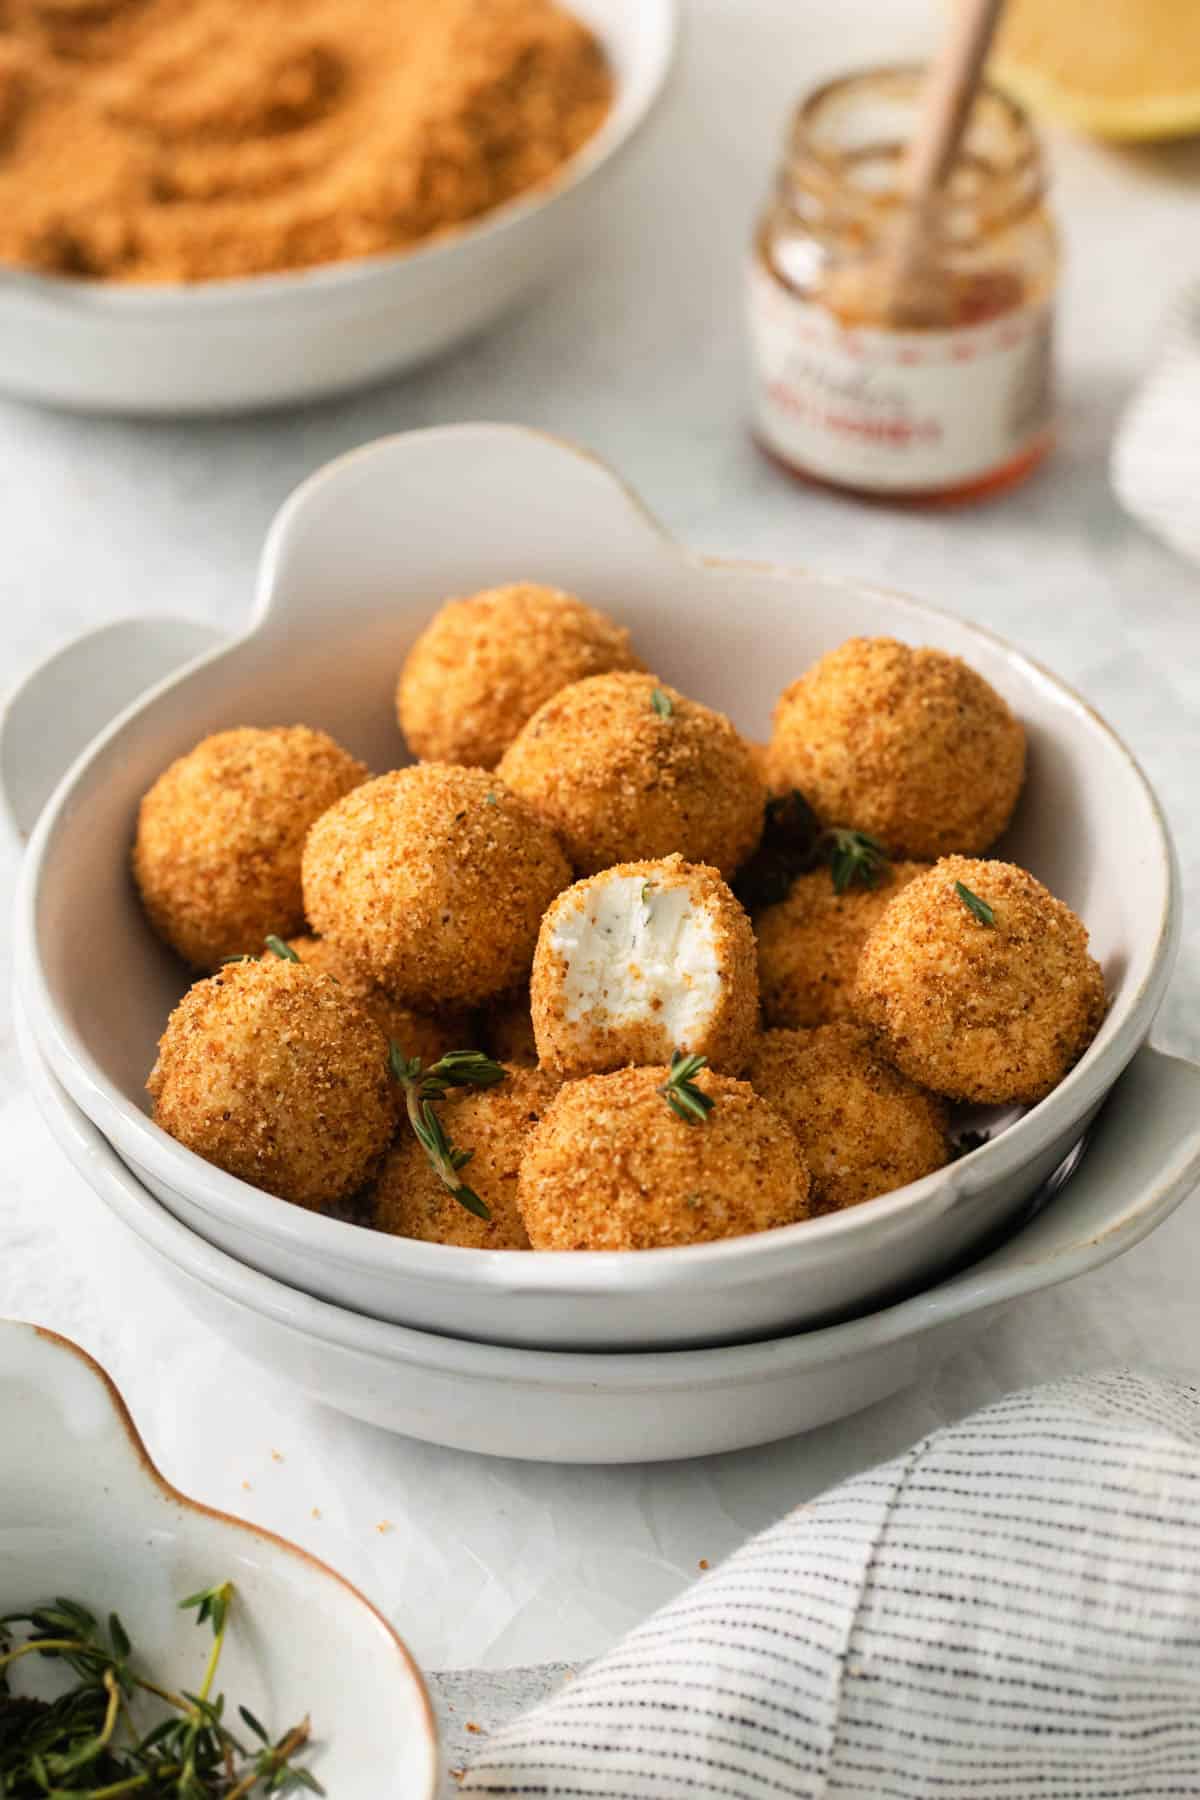 An image of crispy goat cheese bites in a bowl.